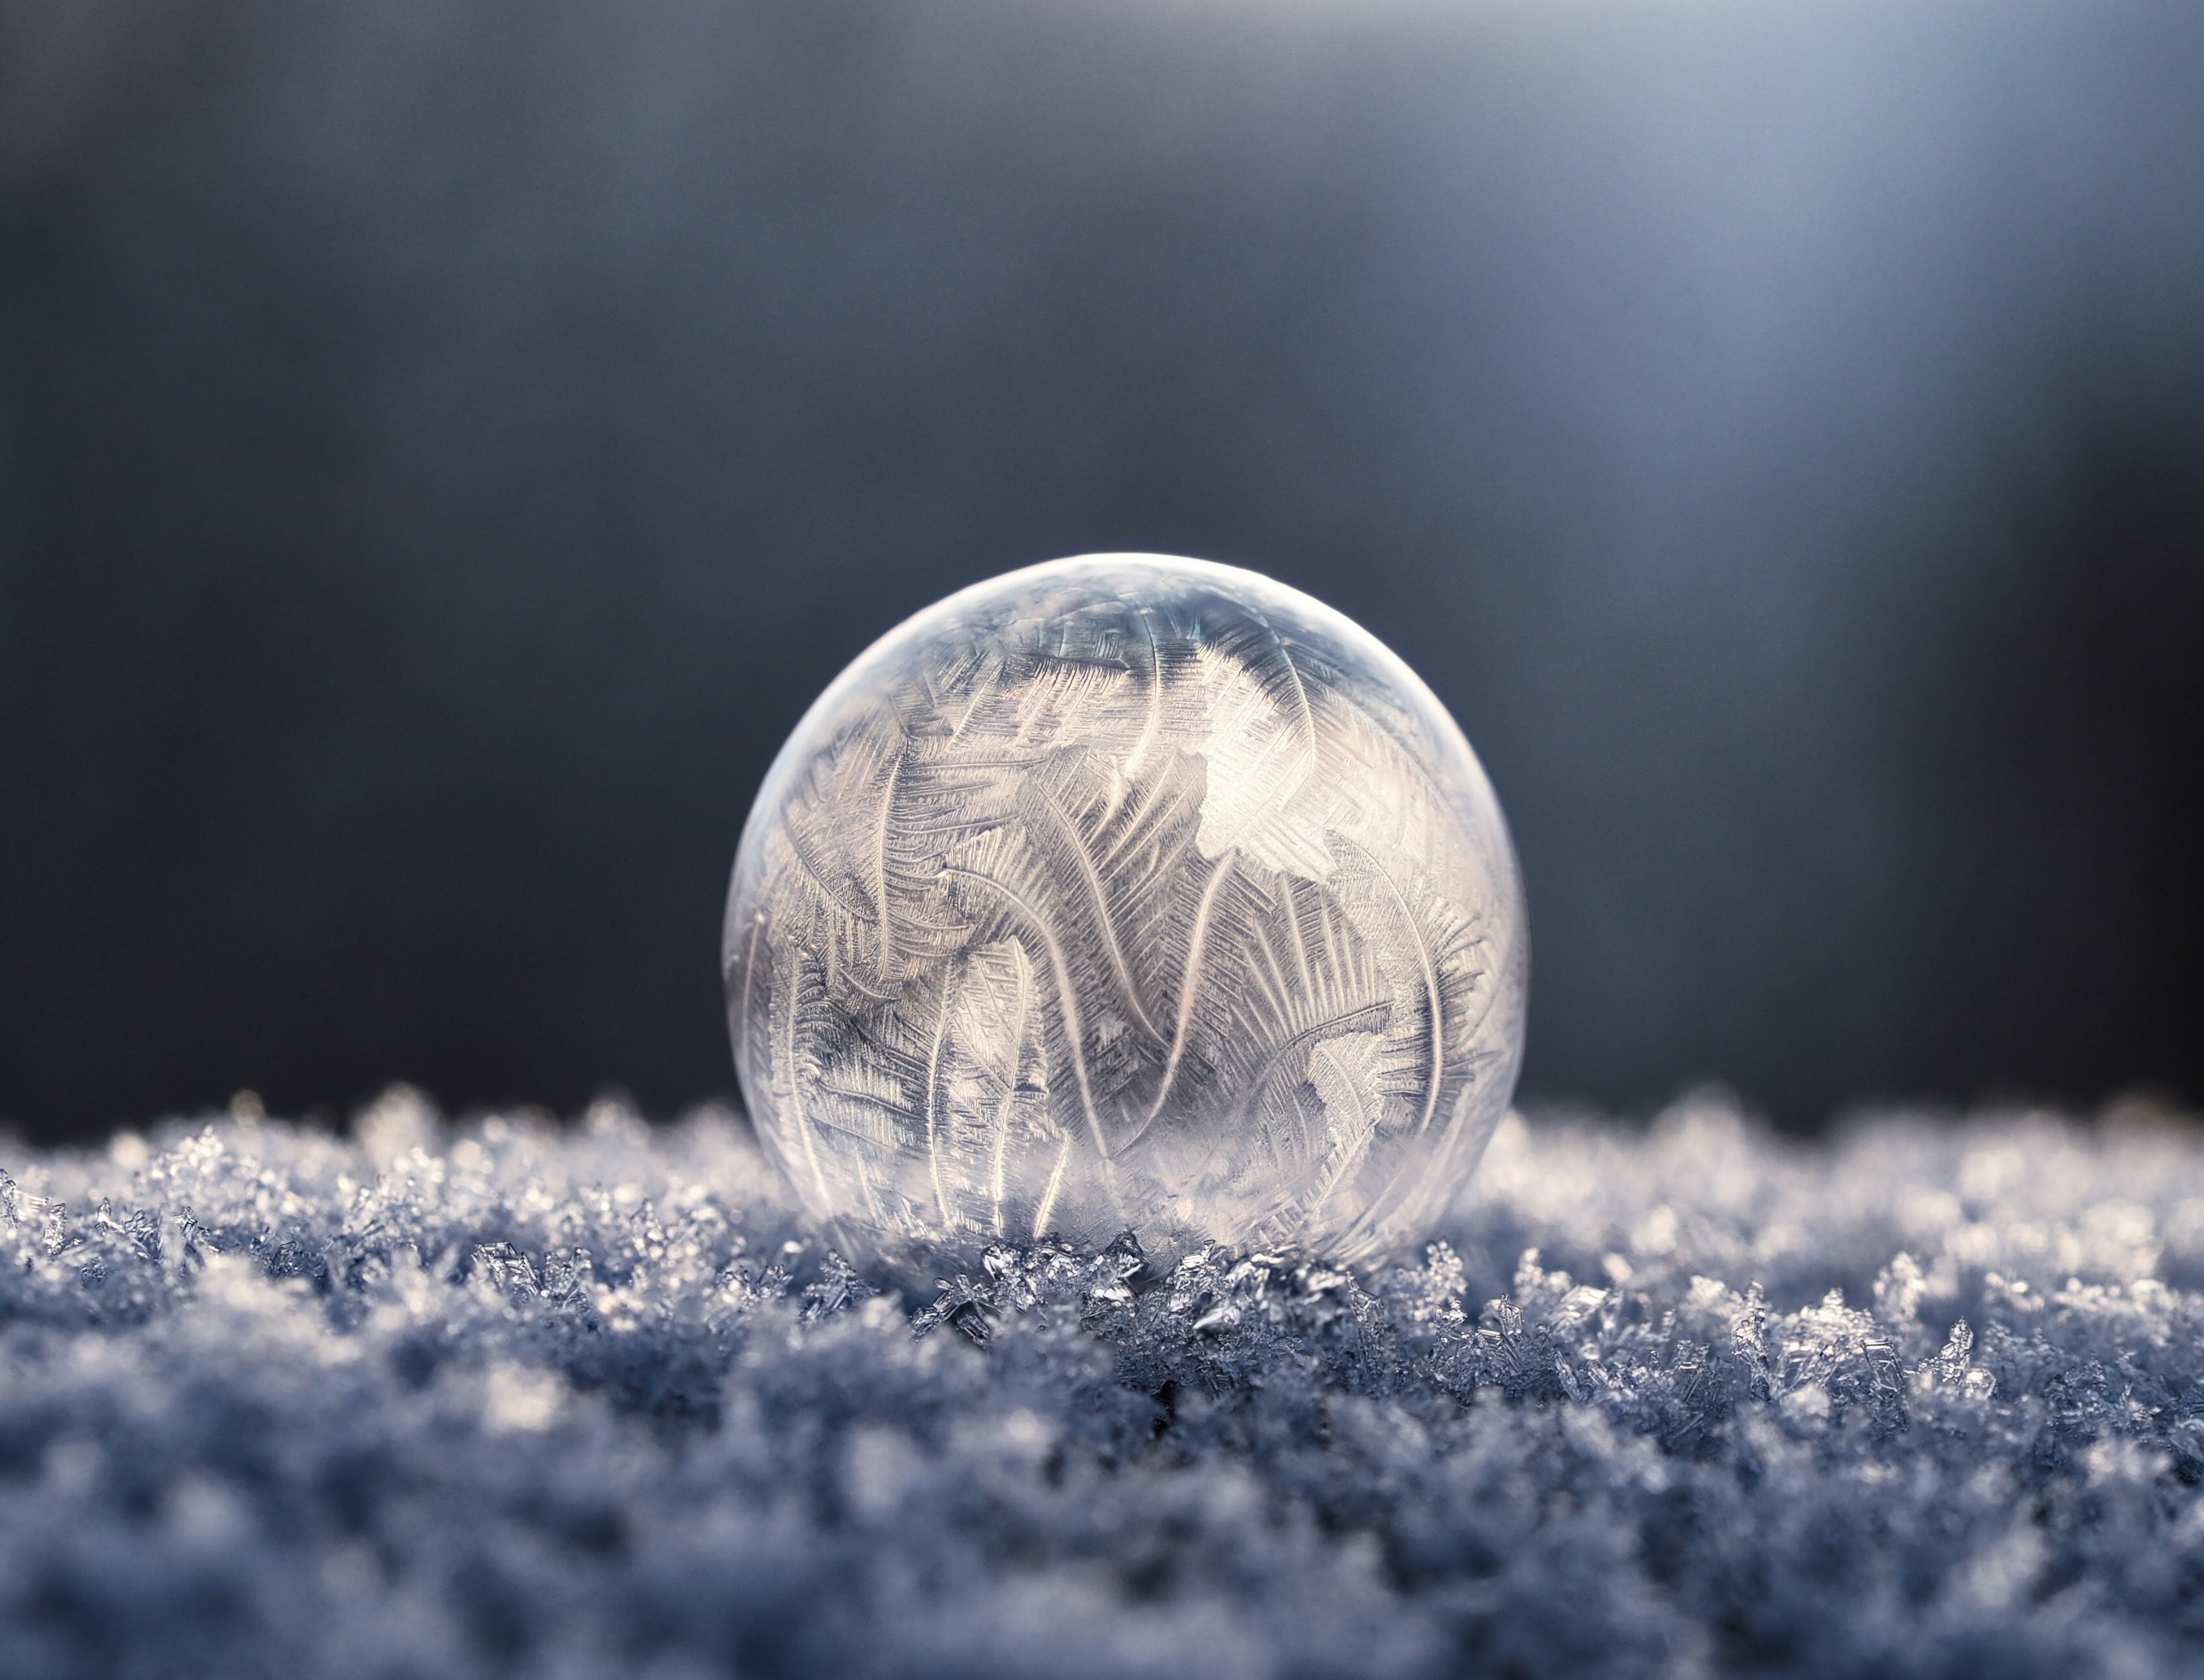 Perfect sphere made of ice with interesting texture